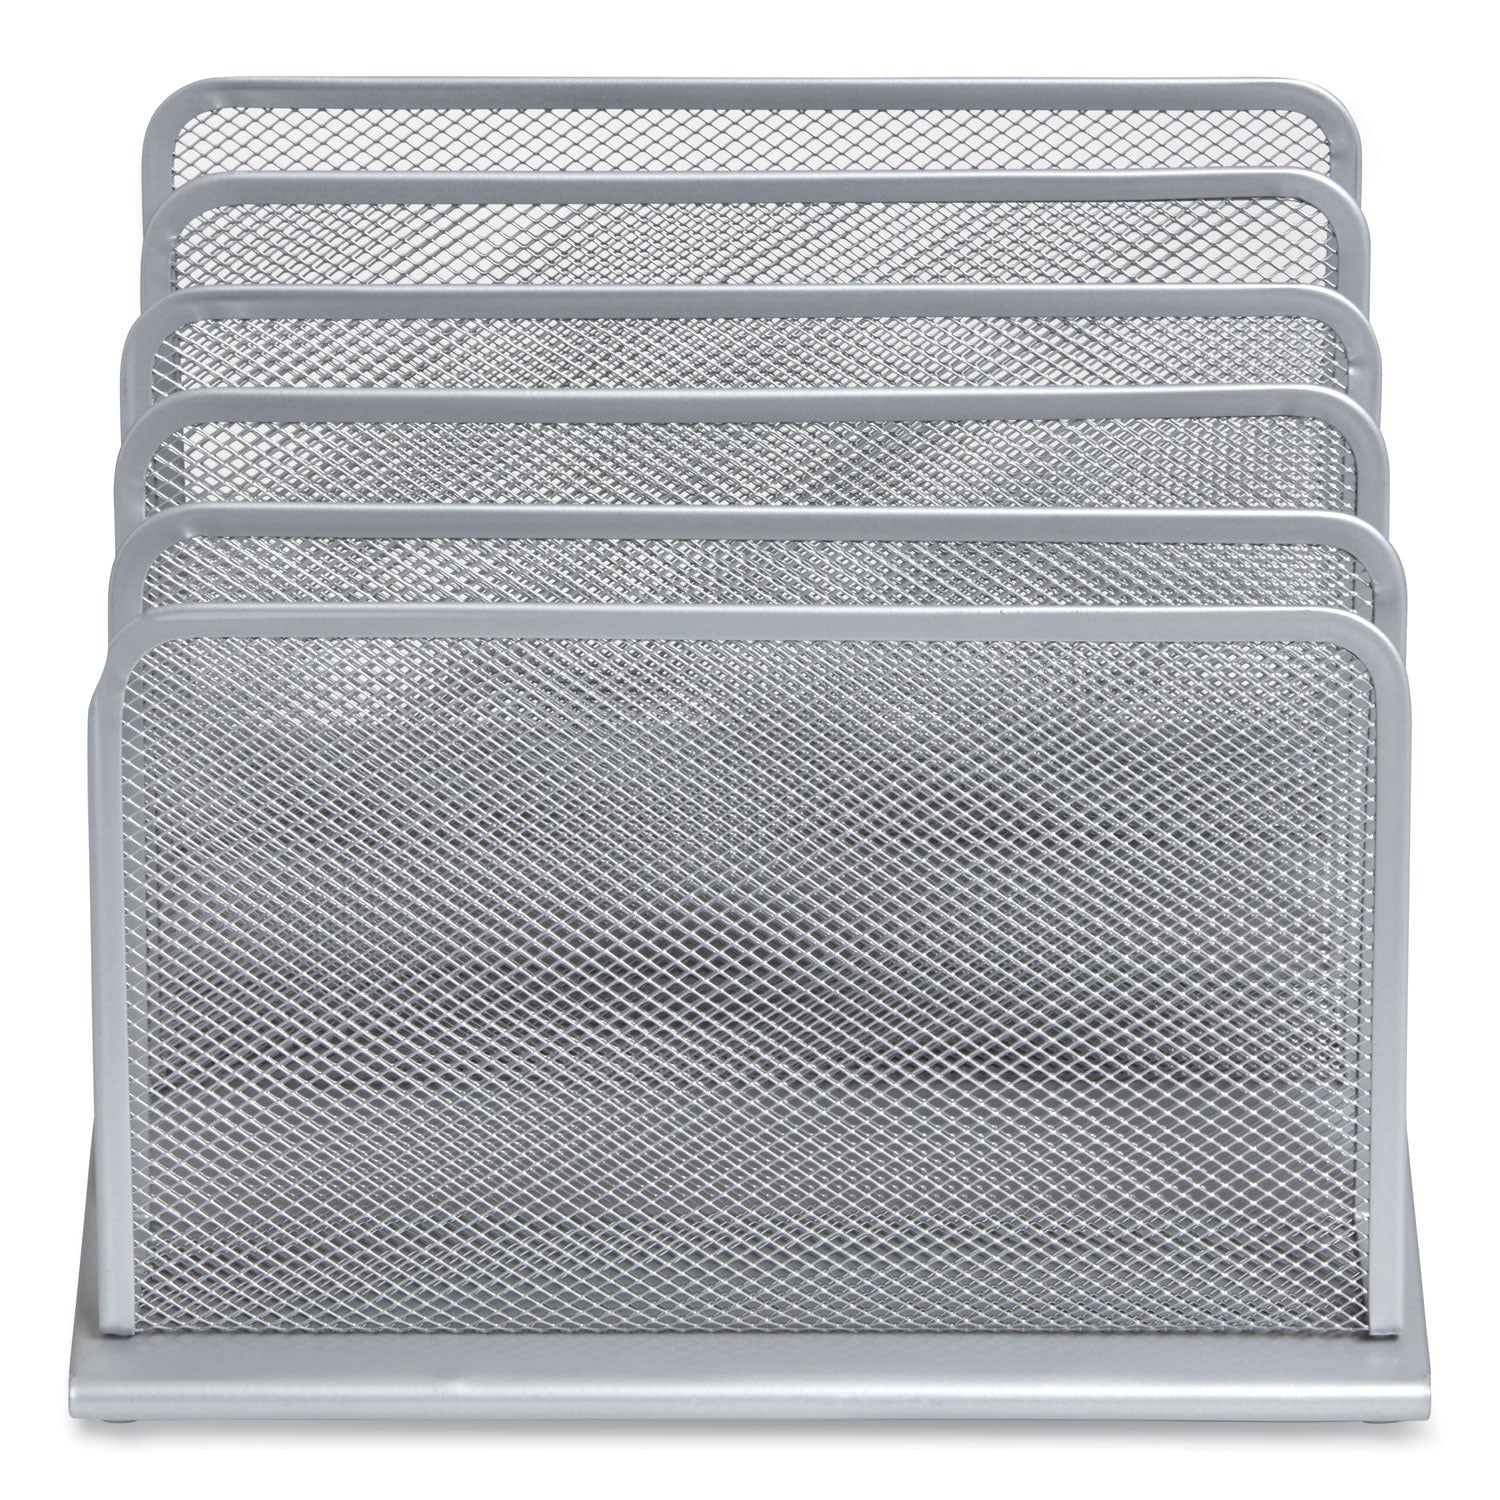 wire-mesh-incline-sorter-open-design-5-sections-letter-size-772-x-1165-x-1083-silver_tud24402450 - 3